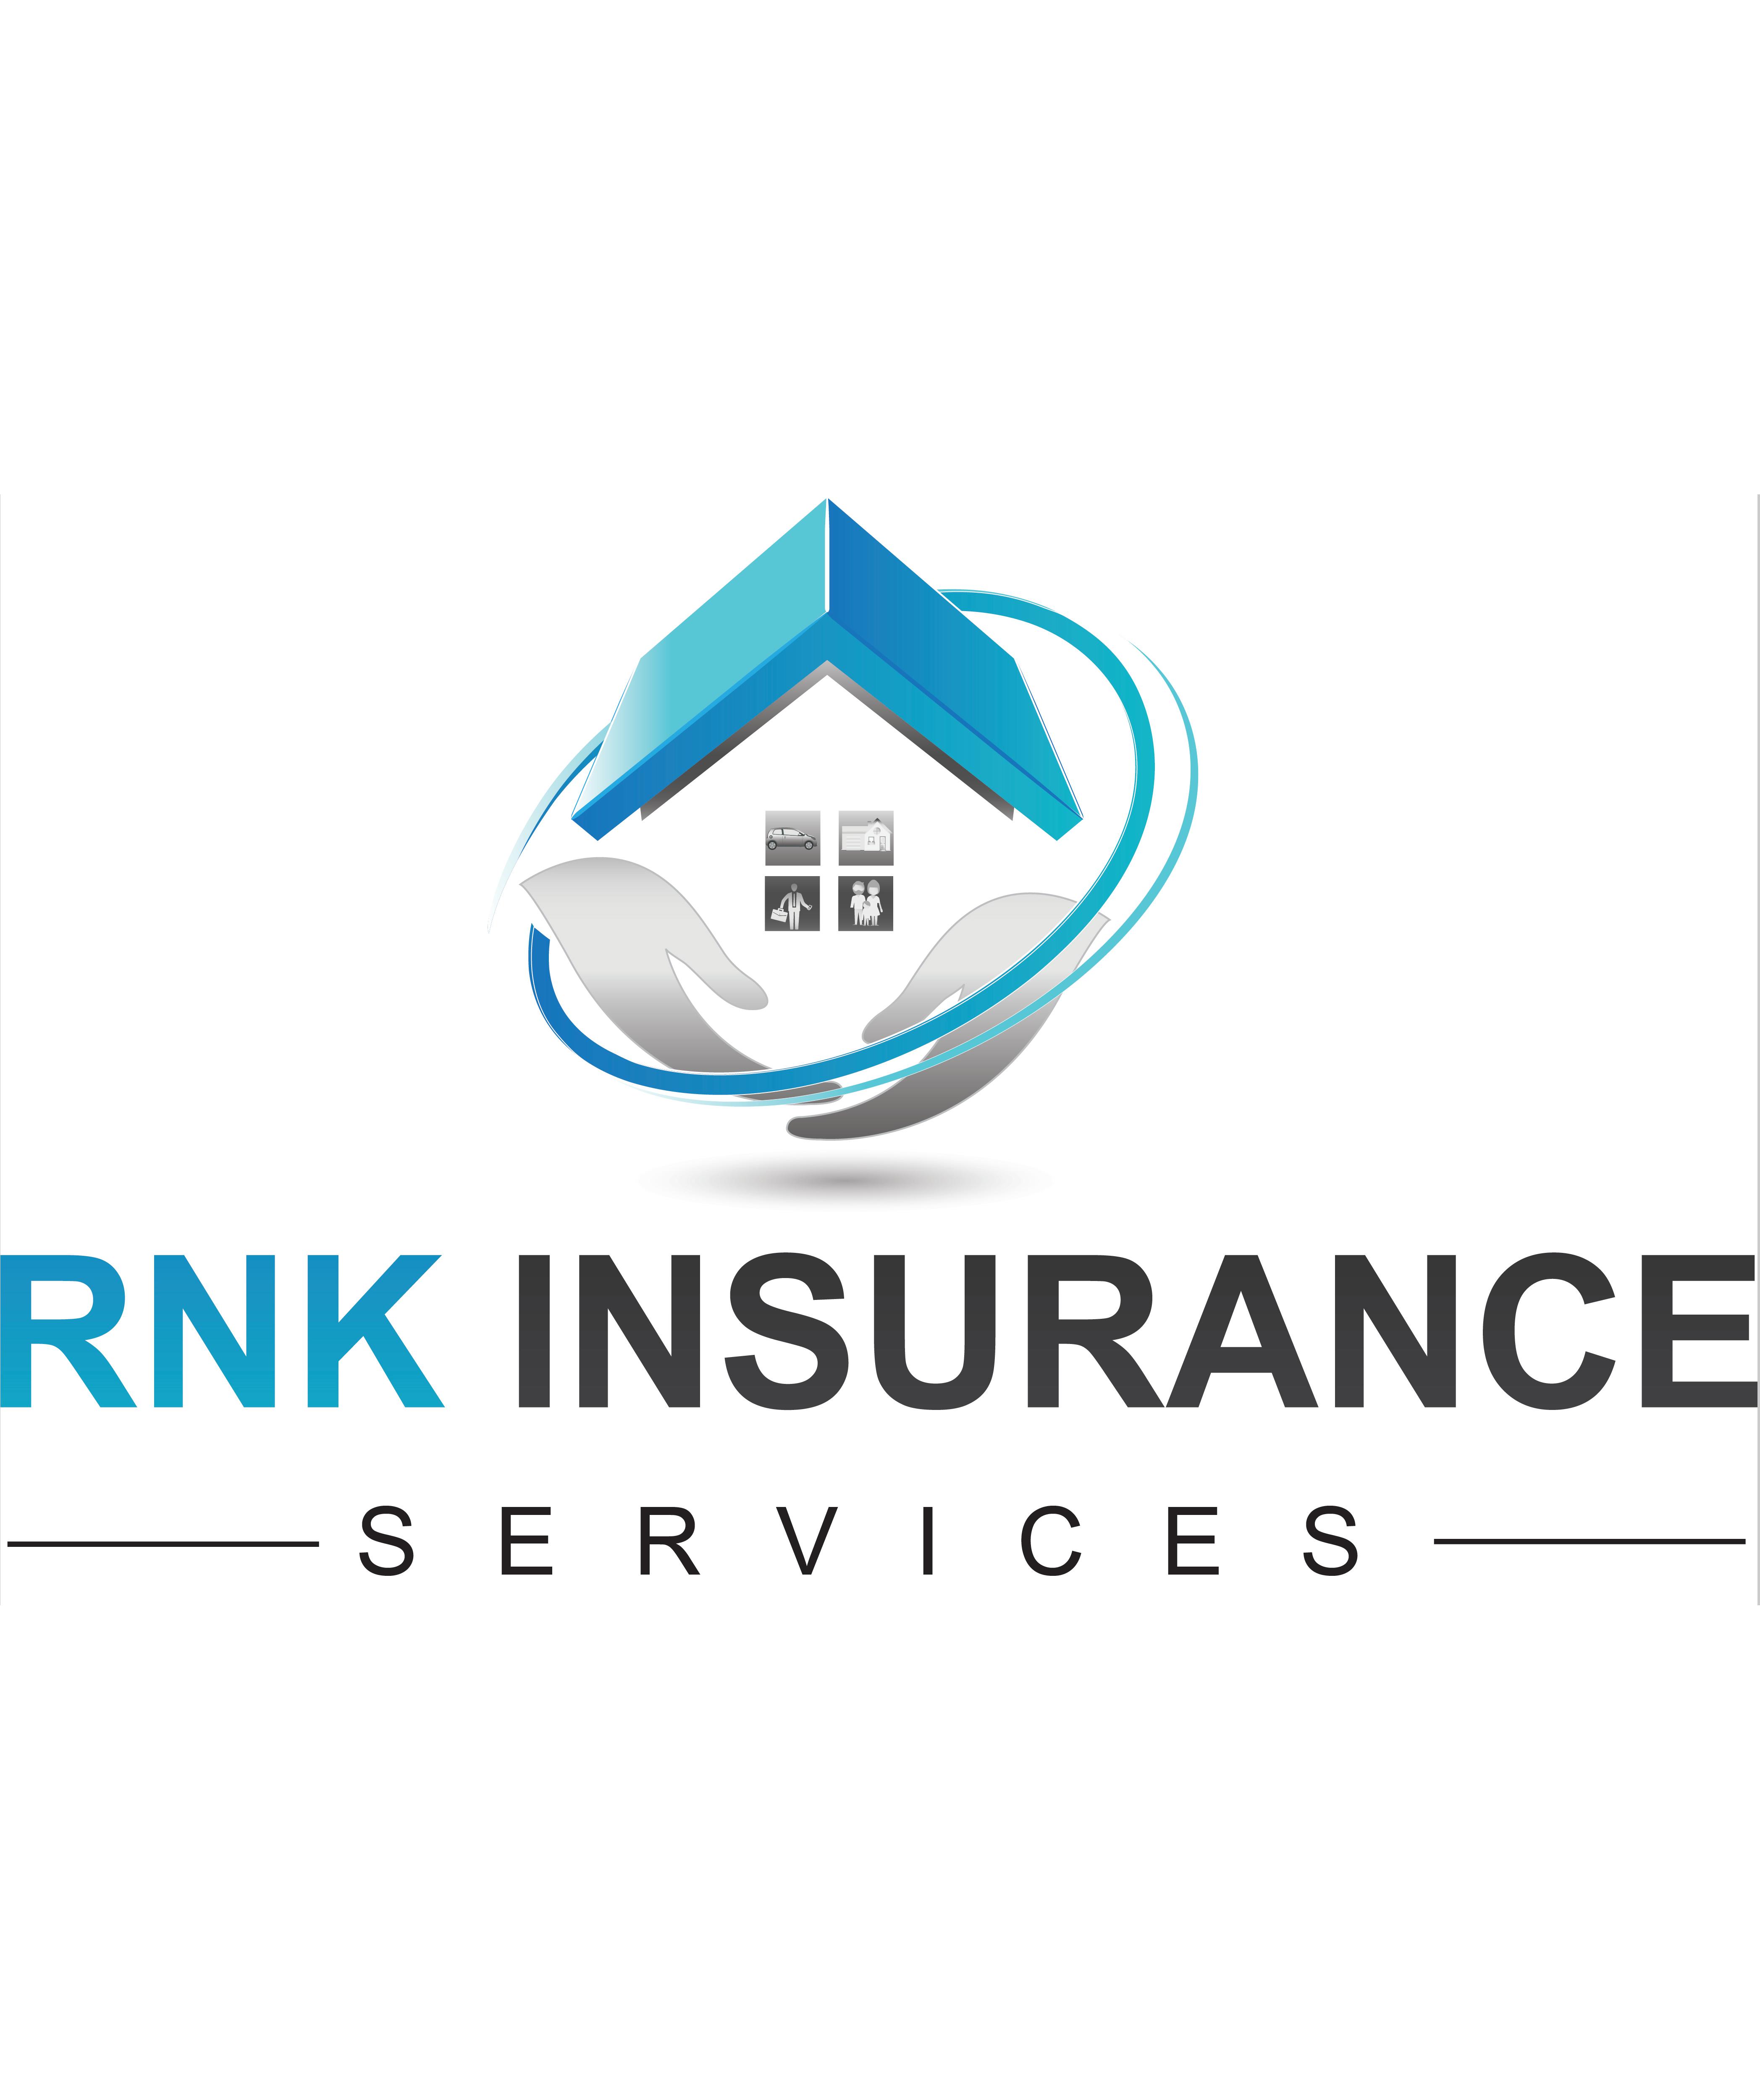 RNK Insurance Services Photo